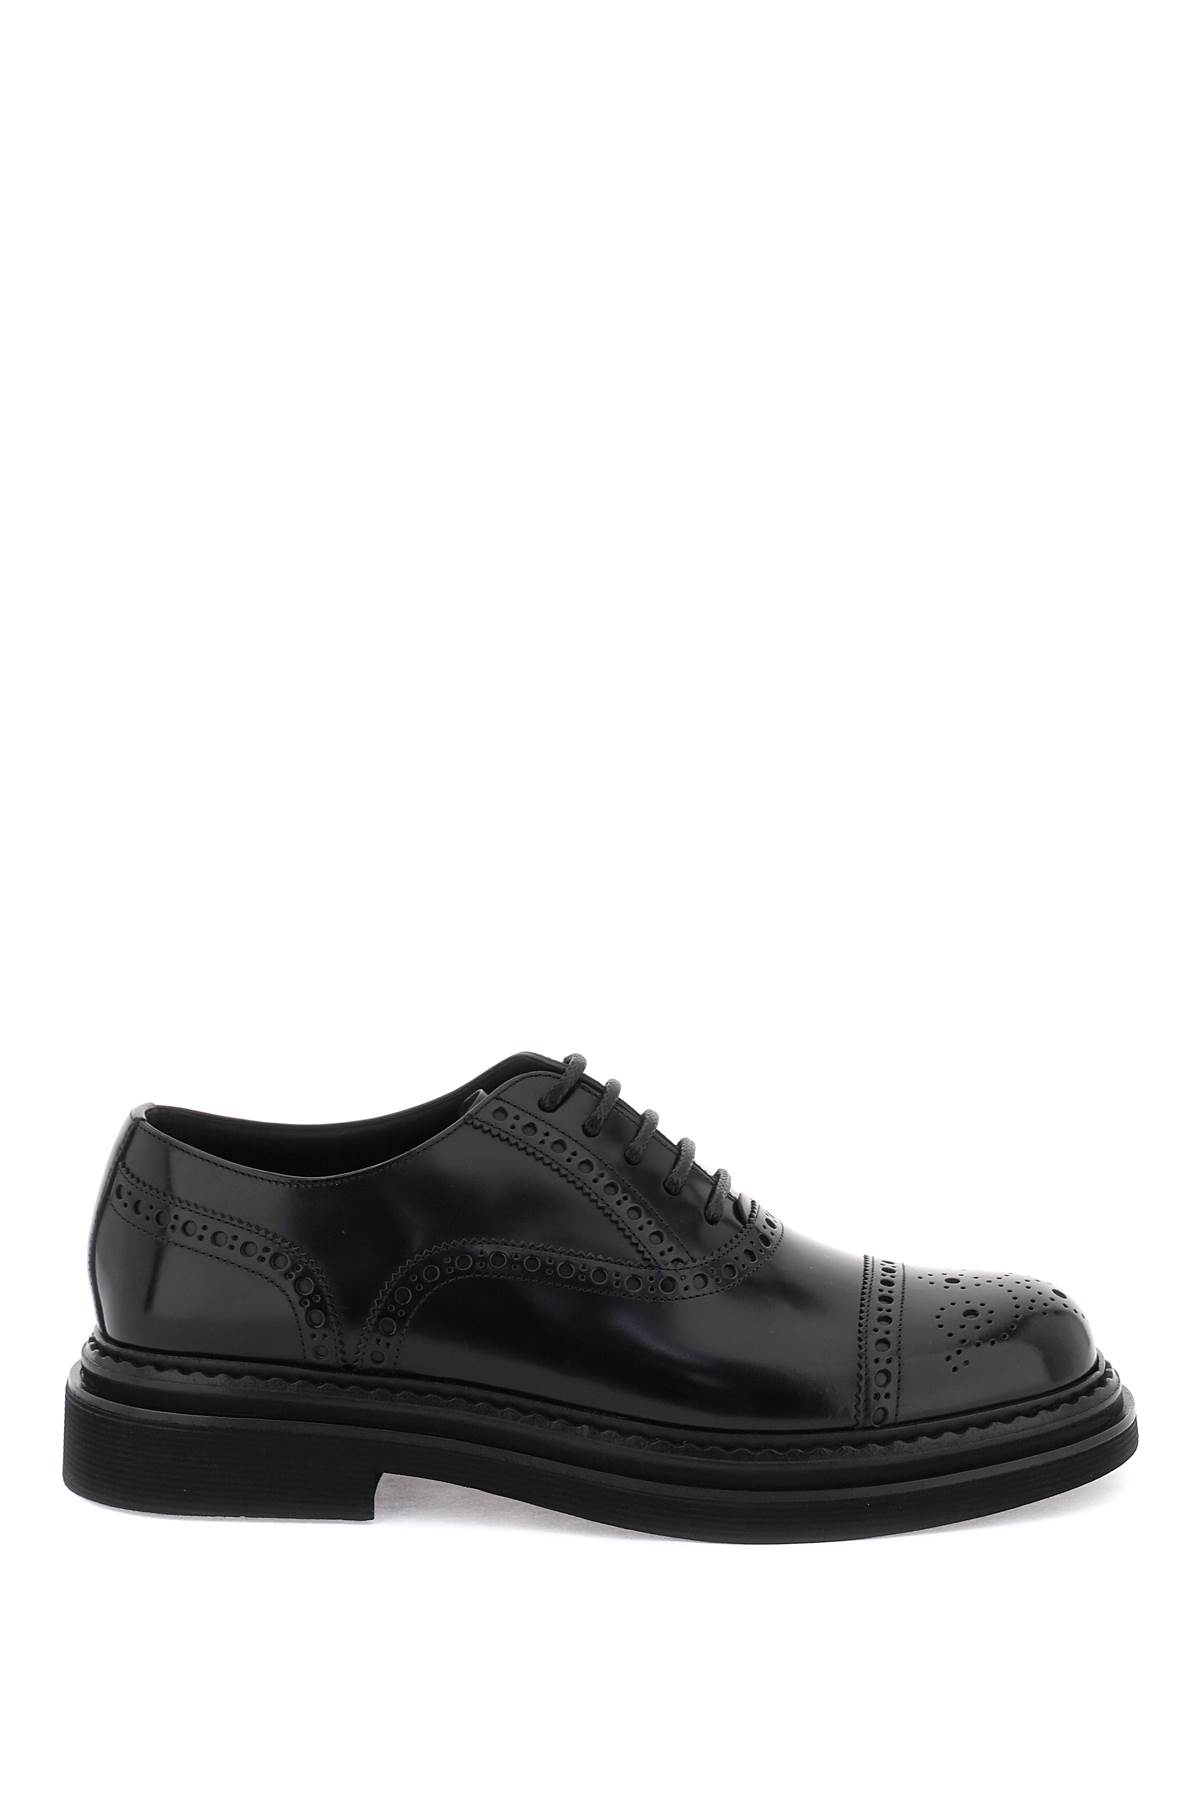 Dolce & Gabbana Brushed Leather Oxford Lace-ups In Nero